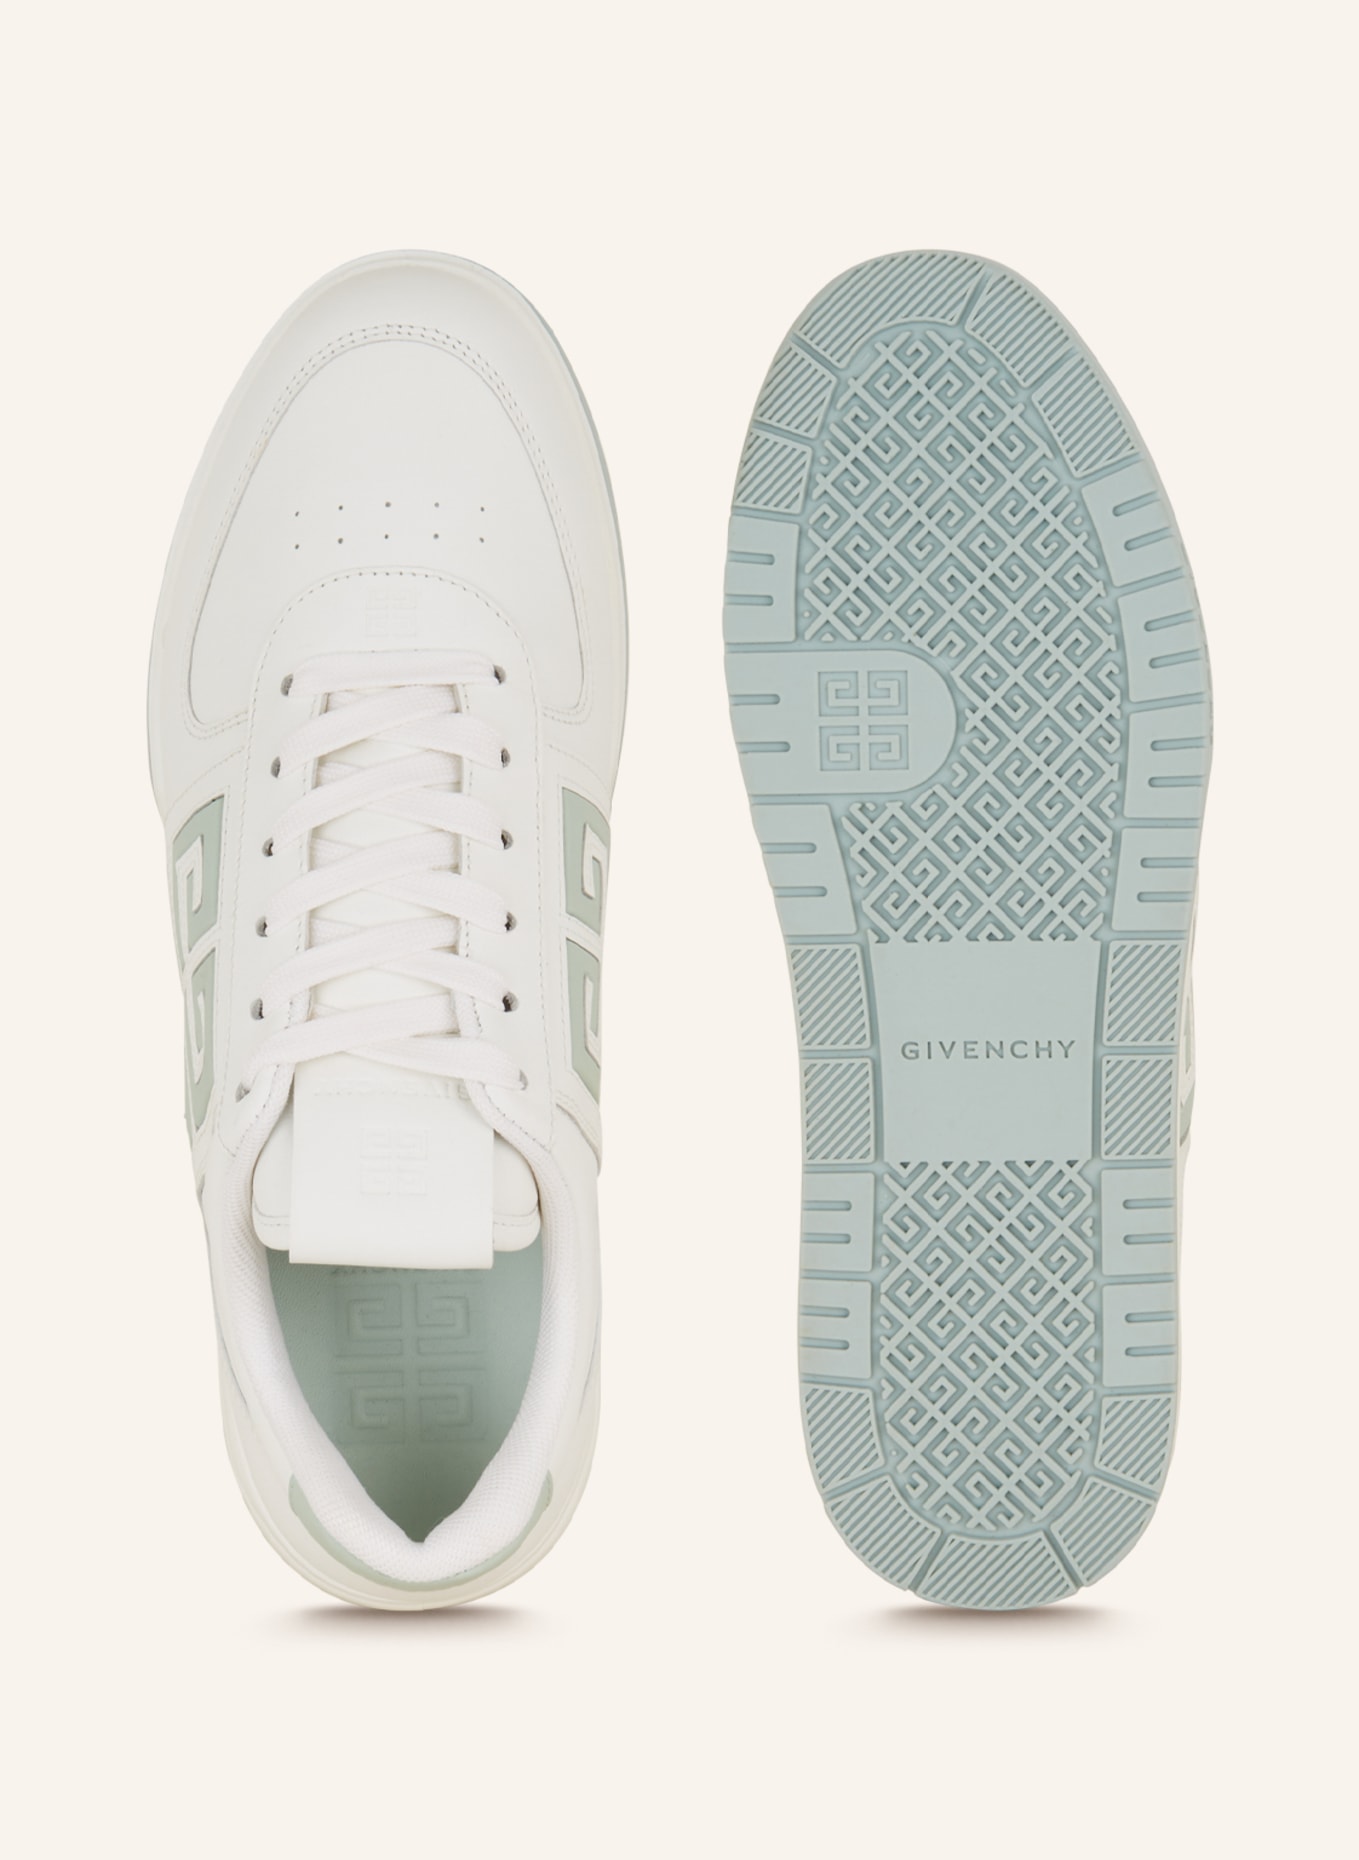 GIVENCHY Sneaker G4 , Farbe: WEISS/ MINT (Bild 5)